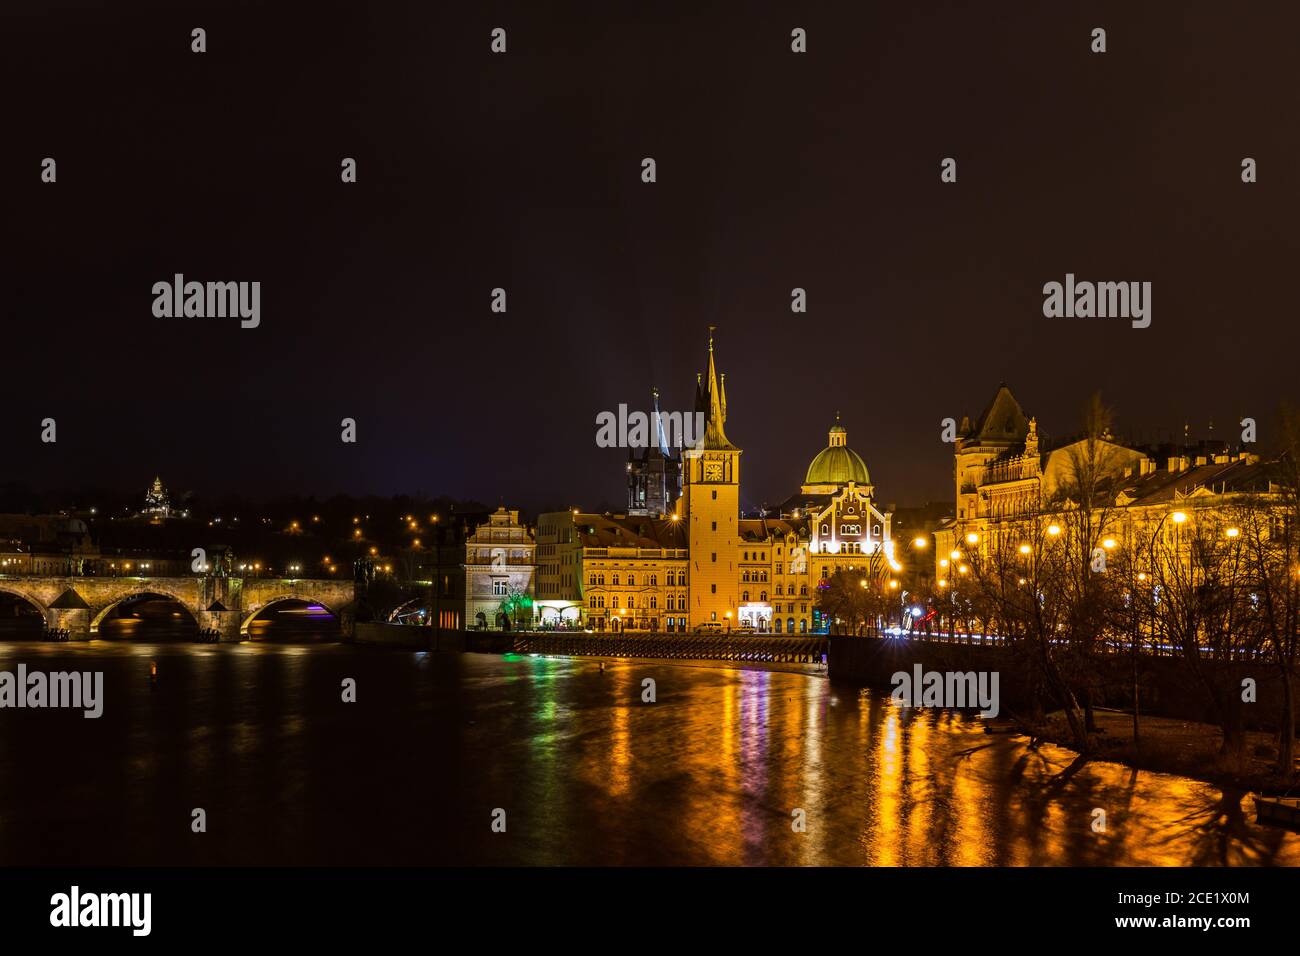 Beautiful night view of the light illuminated Charles Bridge over Vltava River and the Bedrich Smetana Museum in the center of old town of Prague, Cze Stock Photo